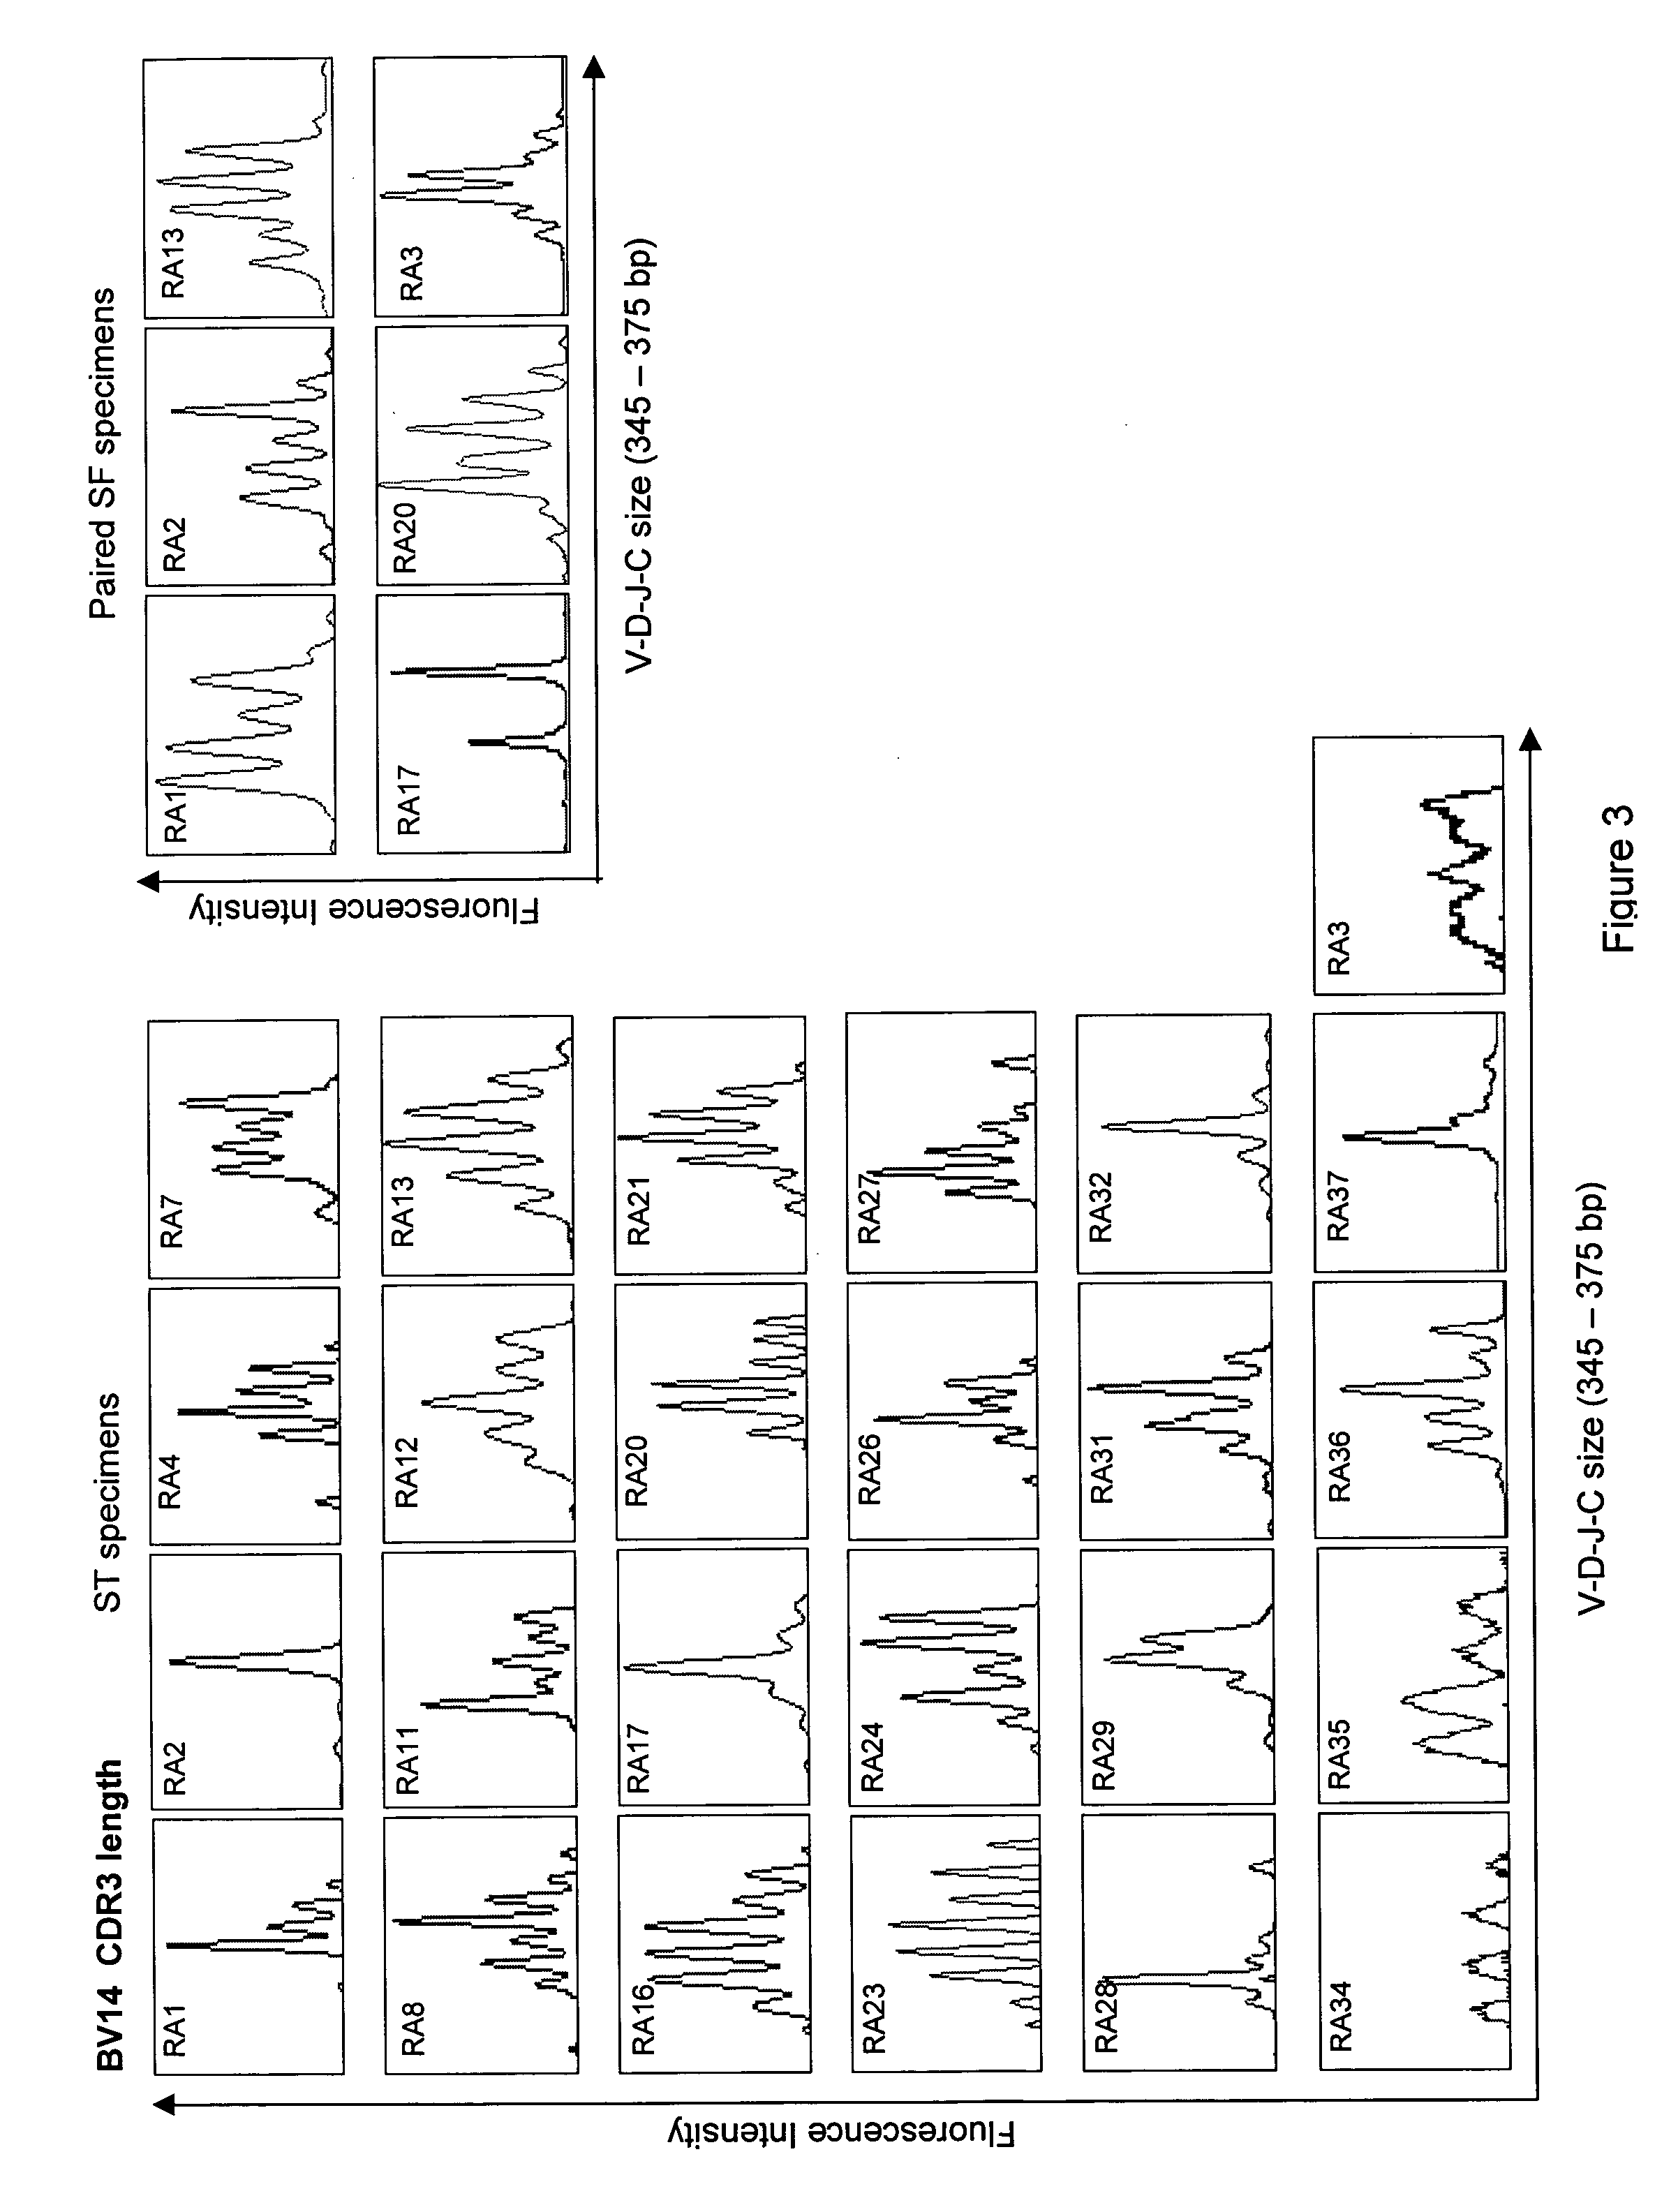 T cell receptor CDR3 sequence and methods for detecting and treating rheumatoid arthritis